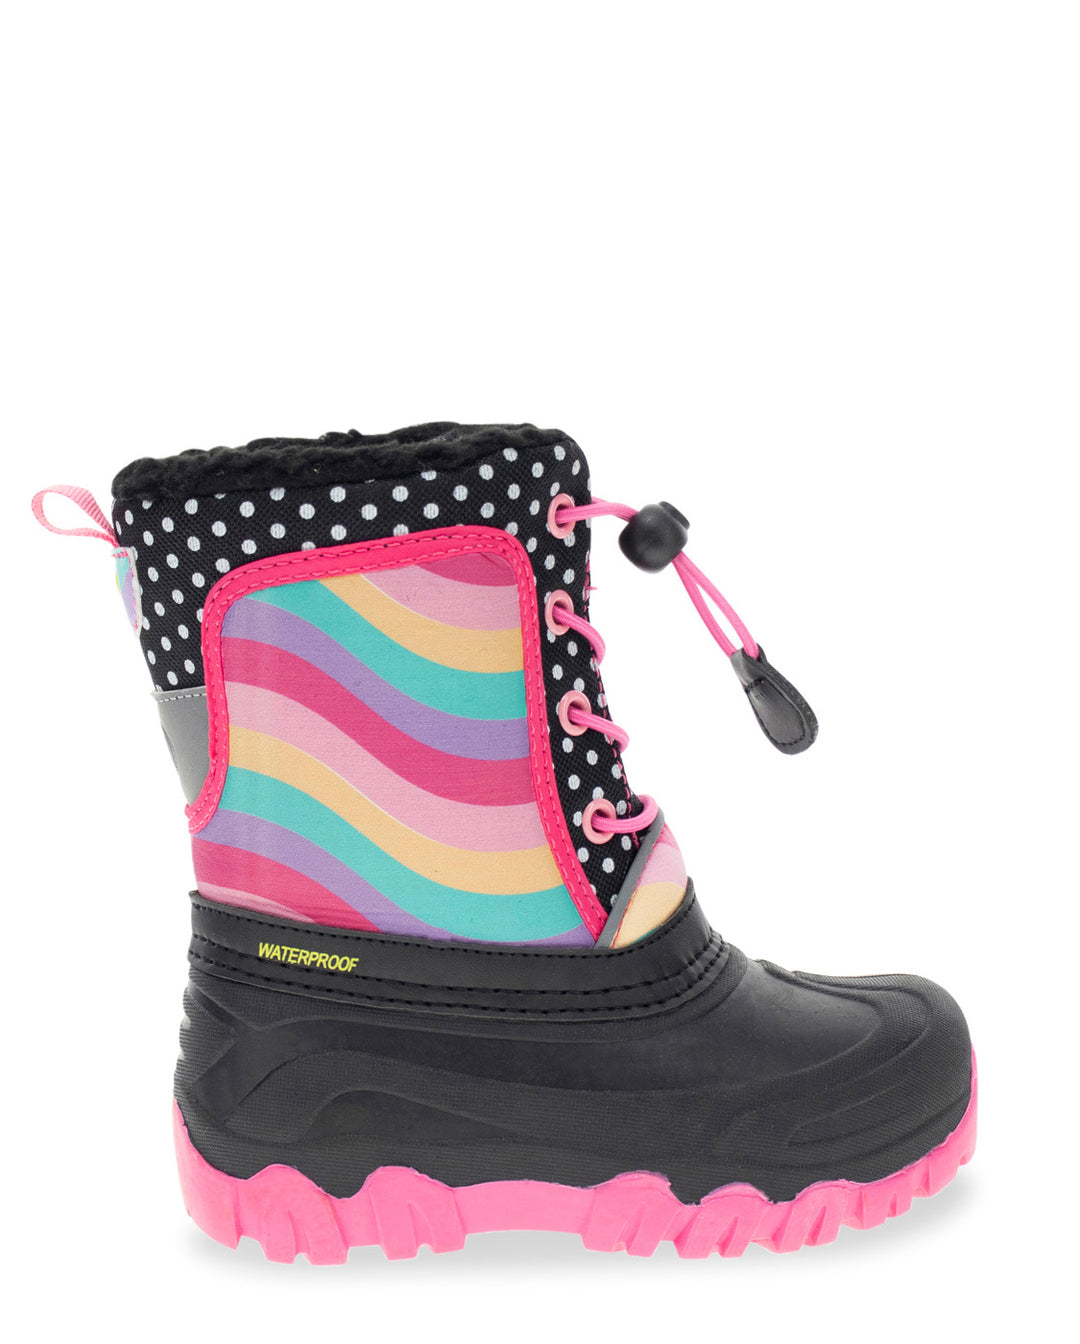 Kids Olympic Cold Weather Boot - Multi